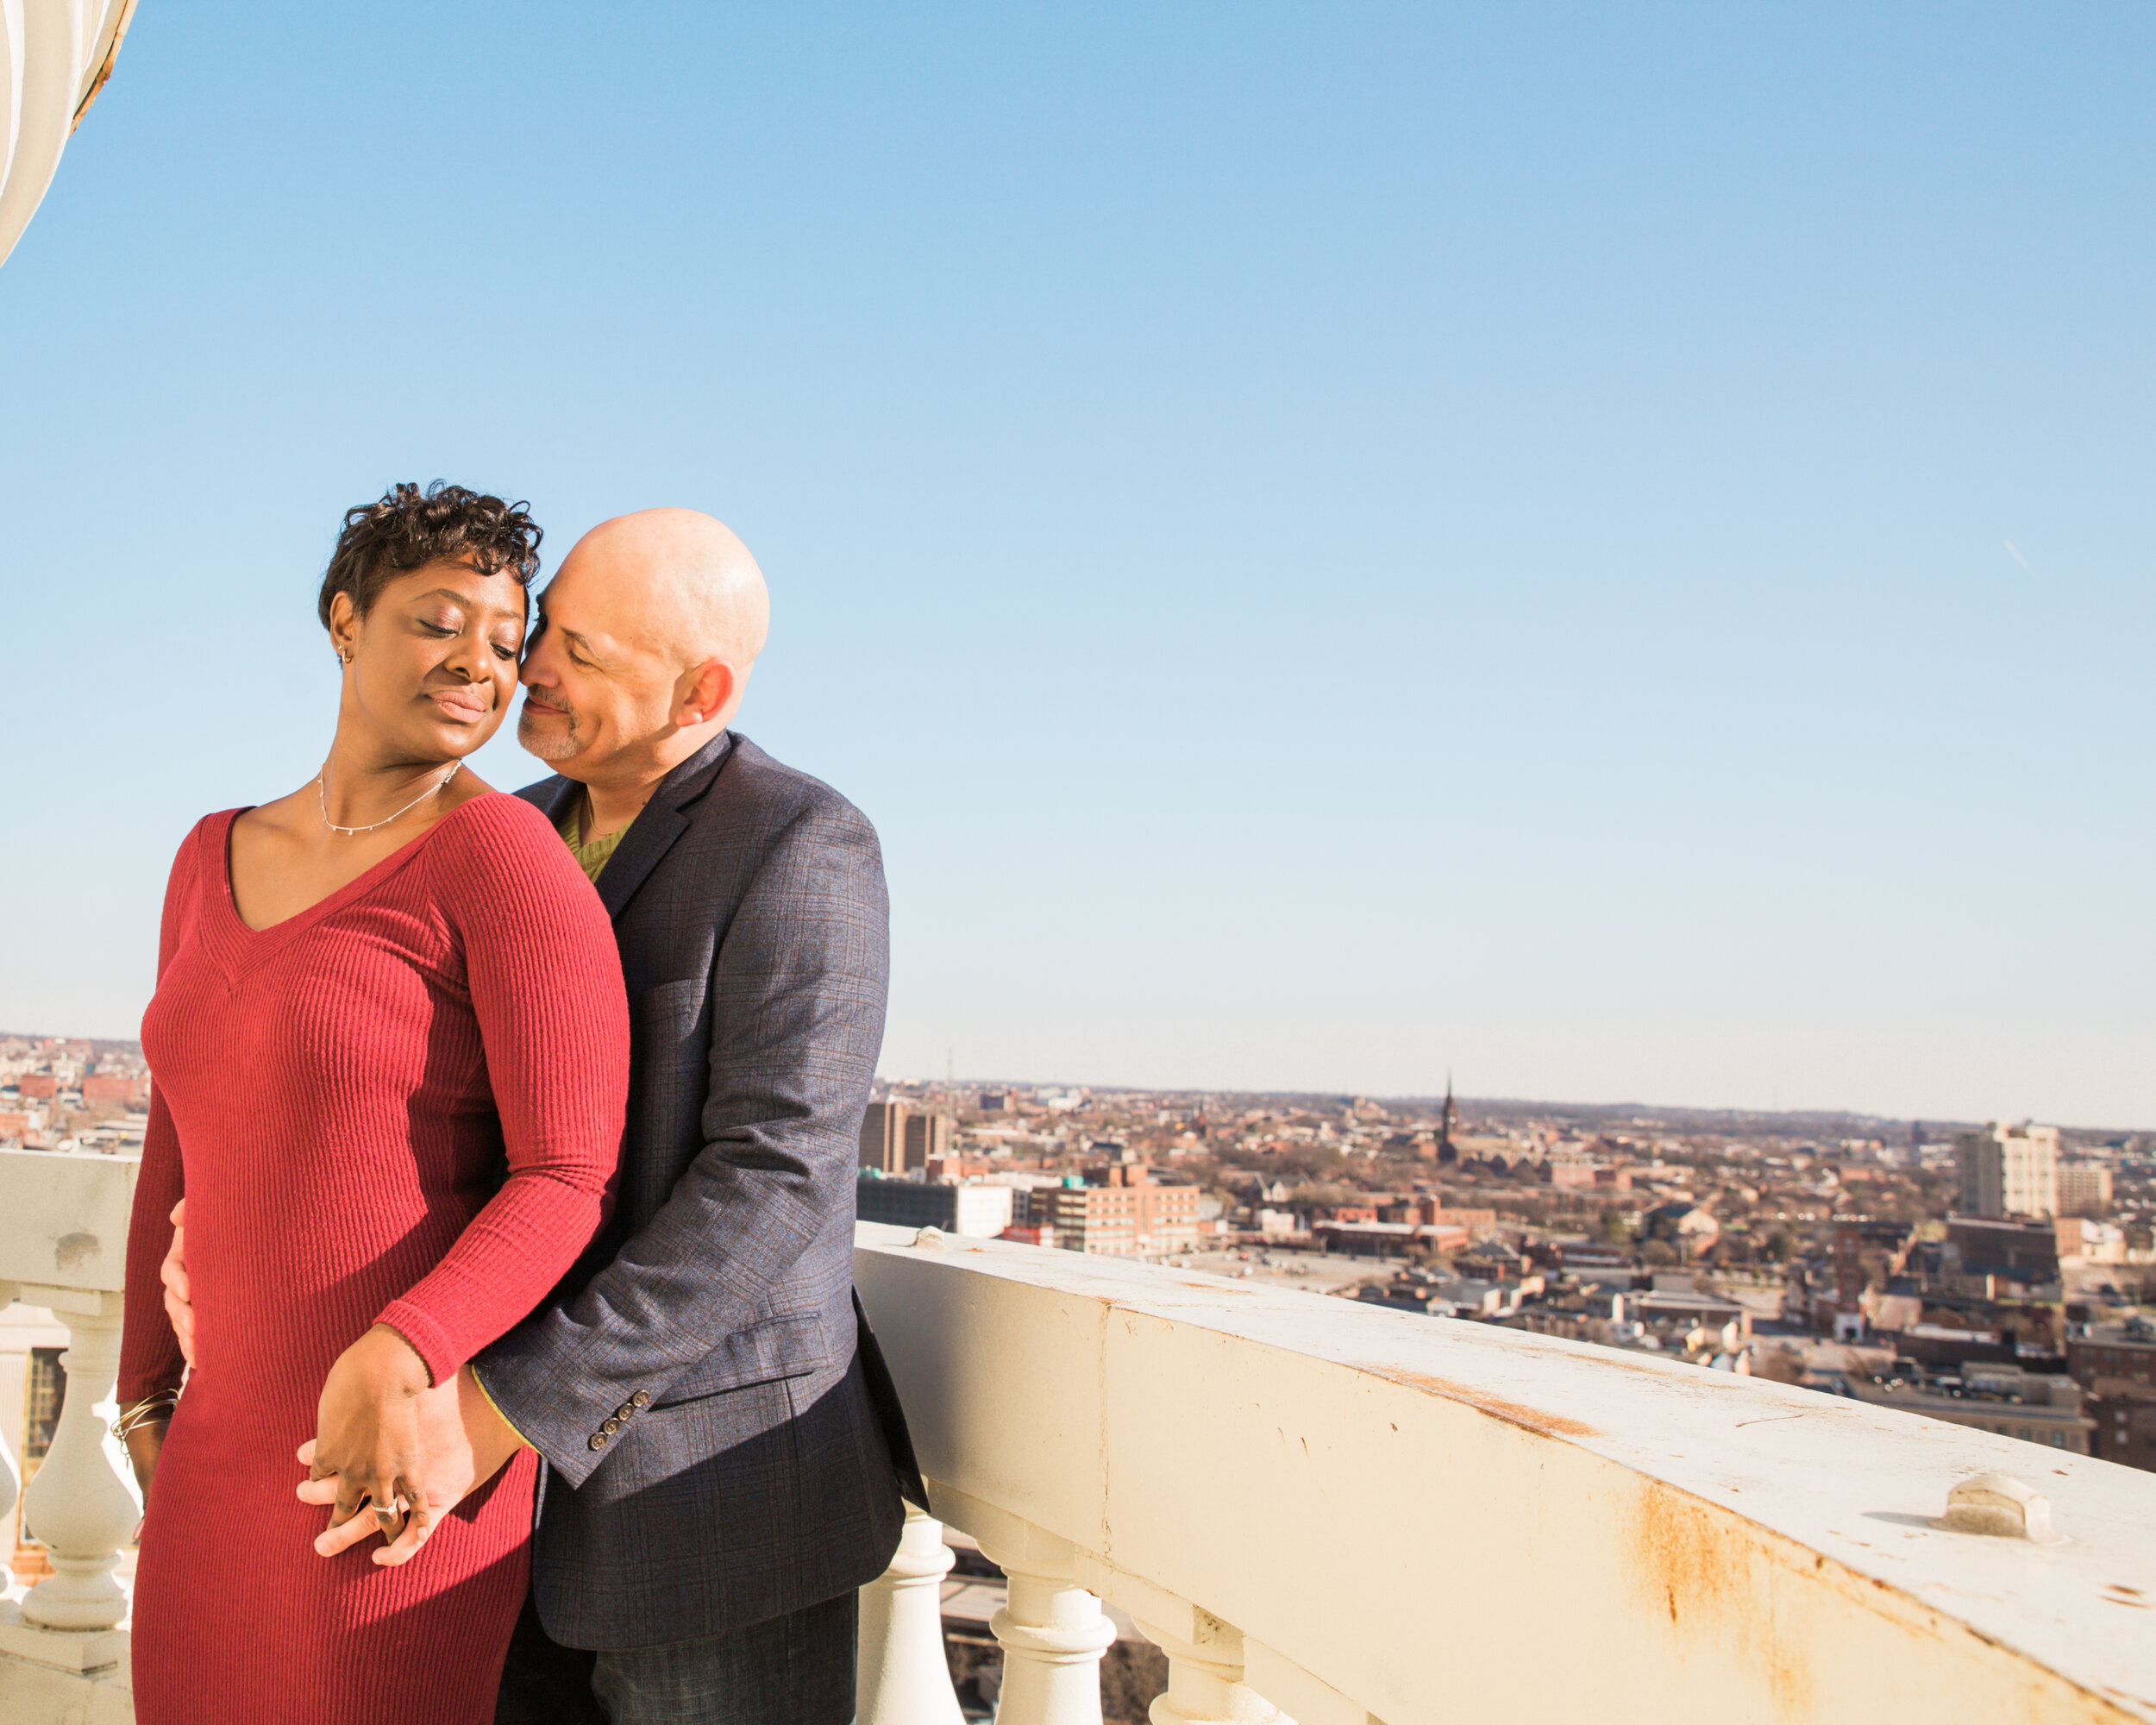 Beautiful Engagement Session at Baltimore City Hall by Baltimores Best Wedding Photographers Megapixels Media Black Wedding Photographers-6.jpg